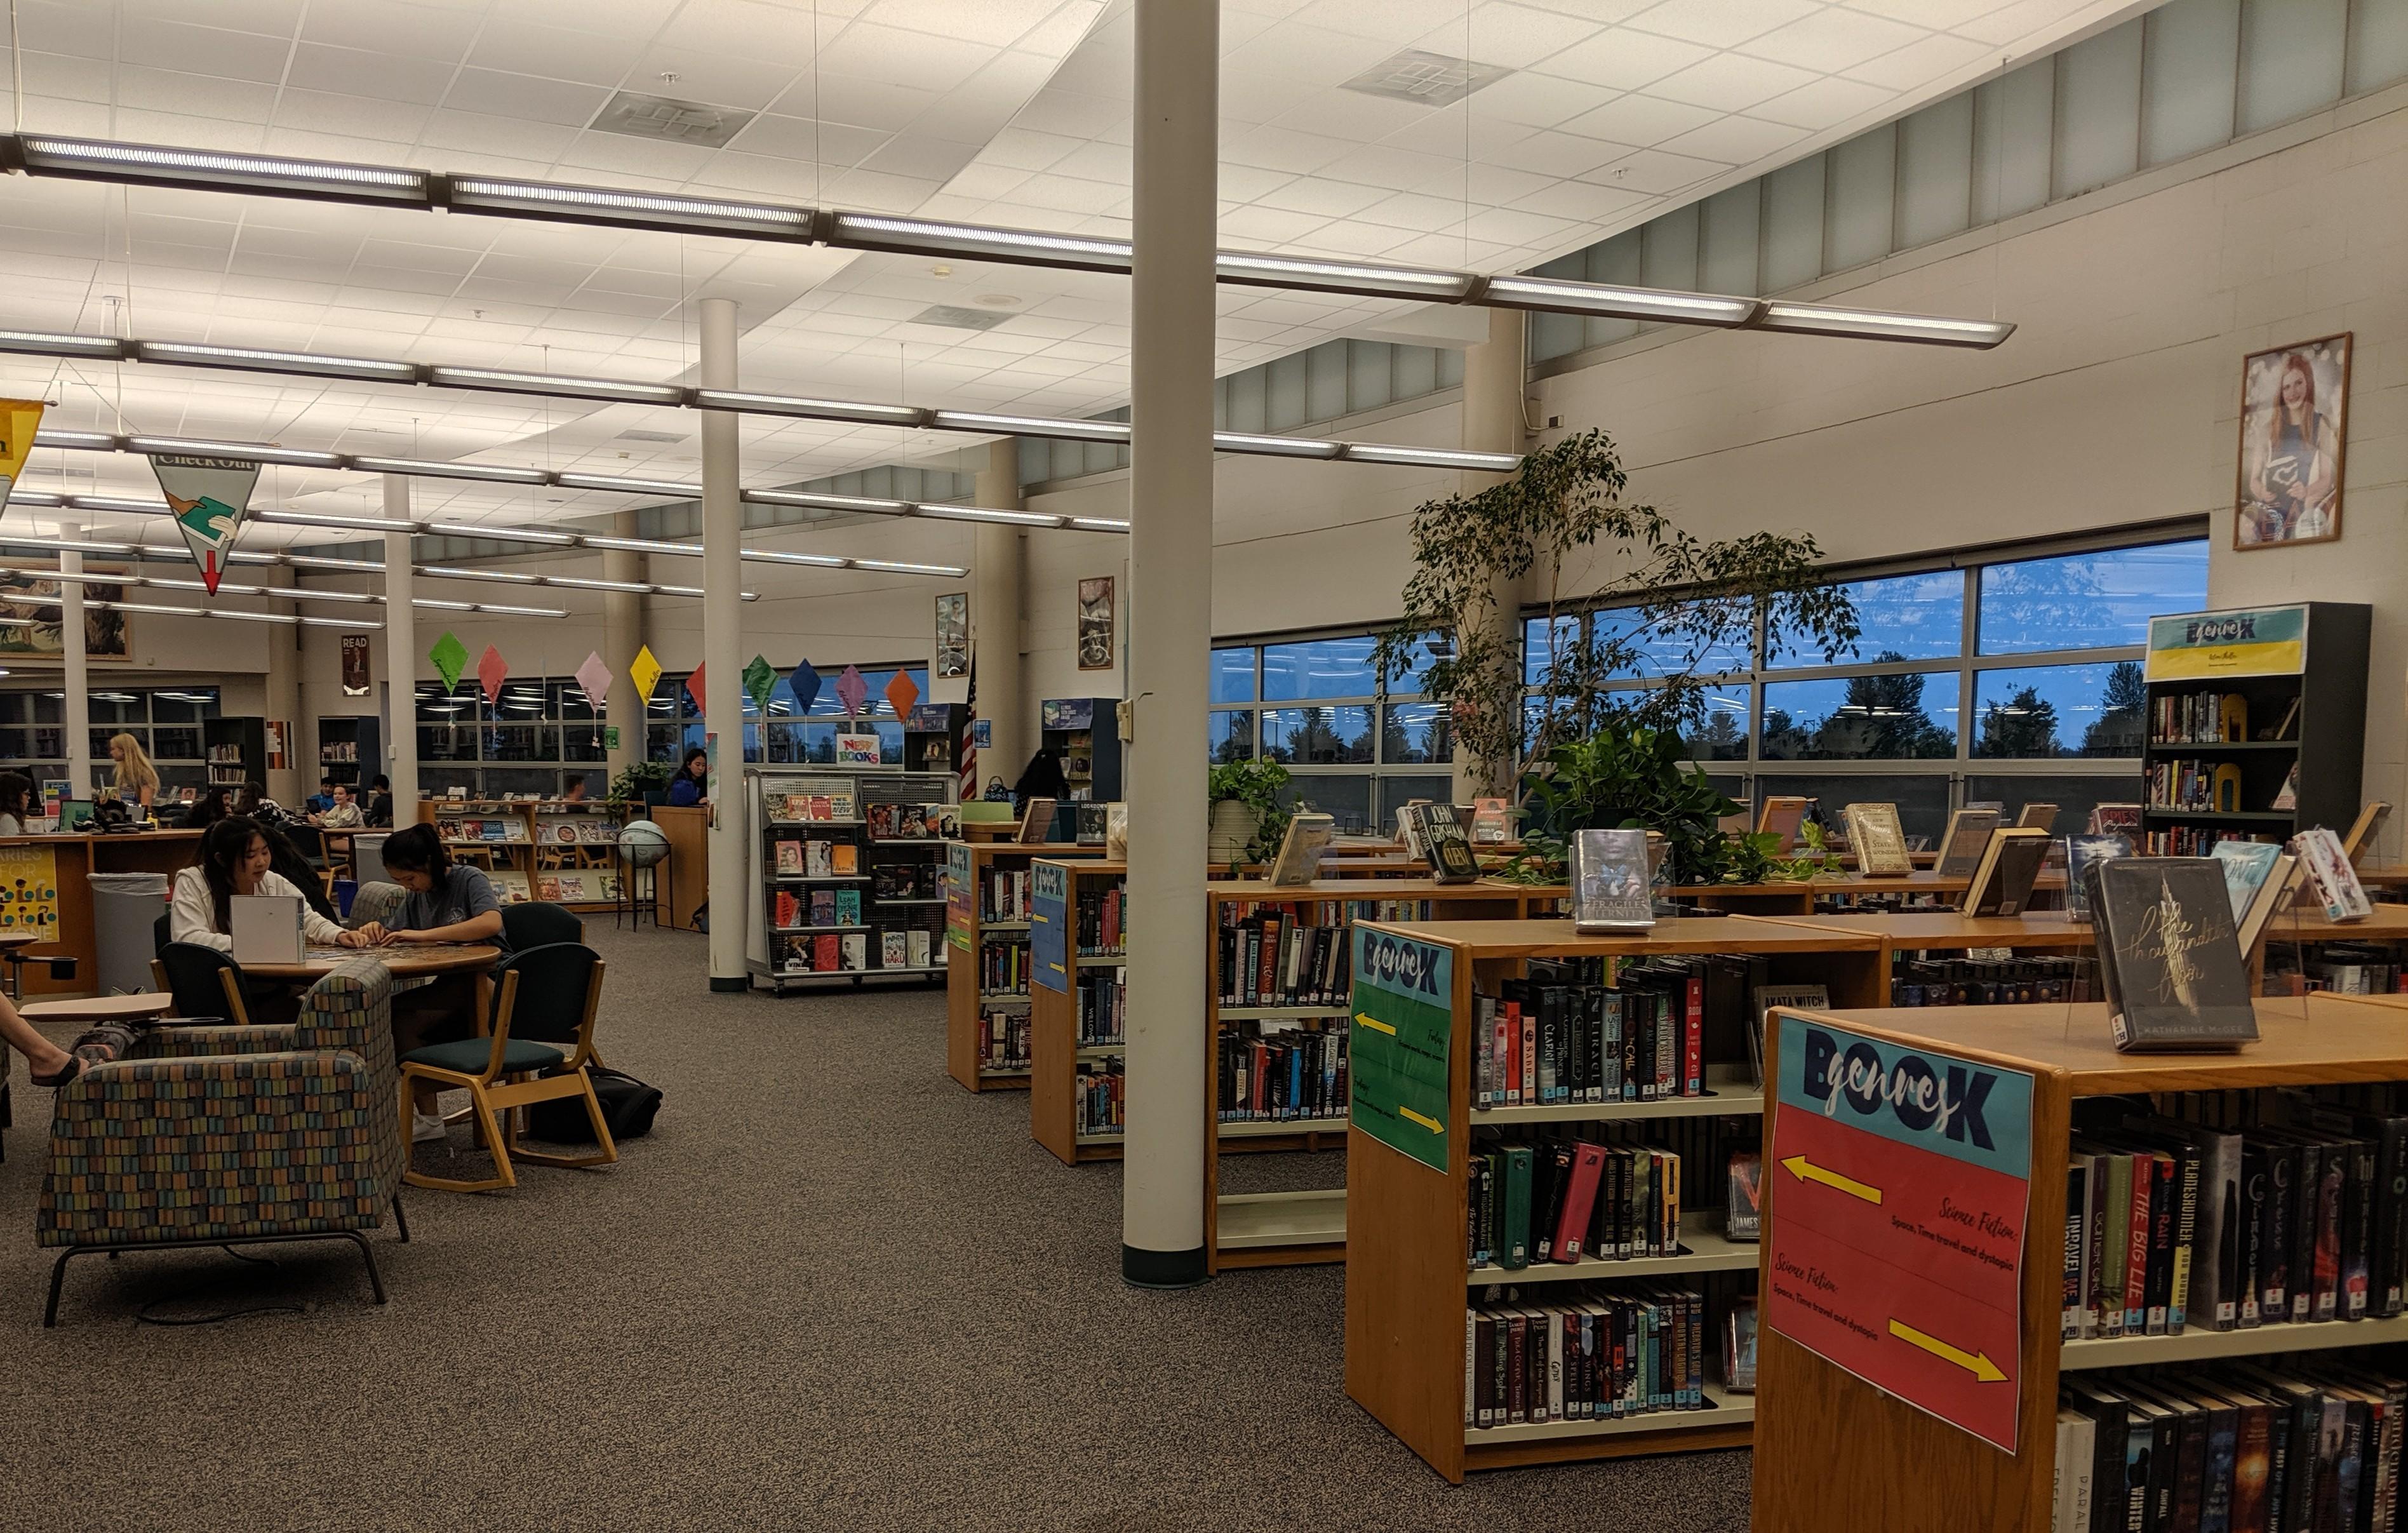 View of the Library Media Center